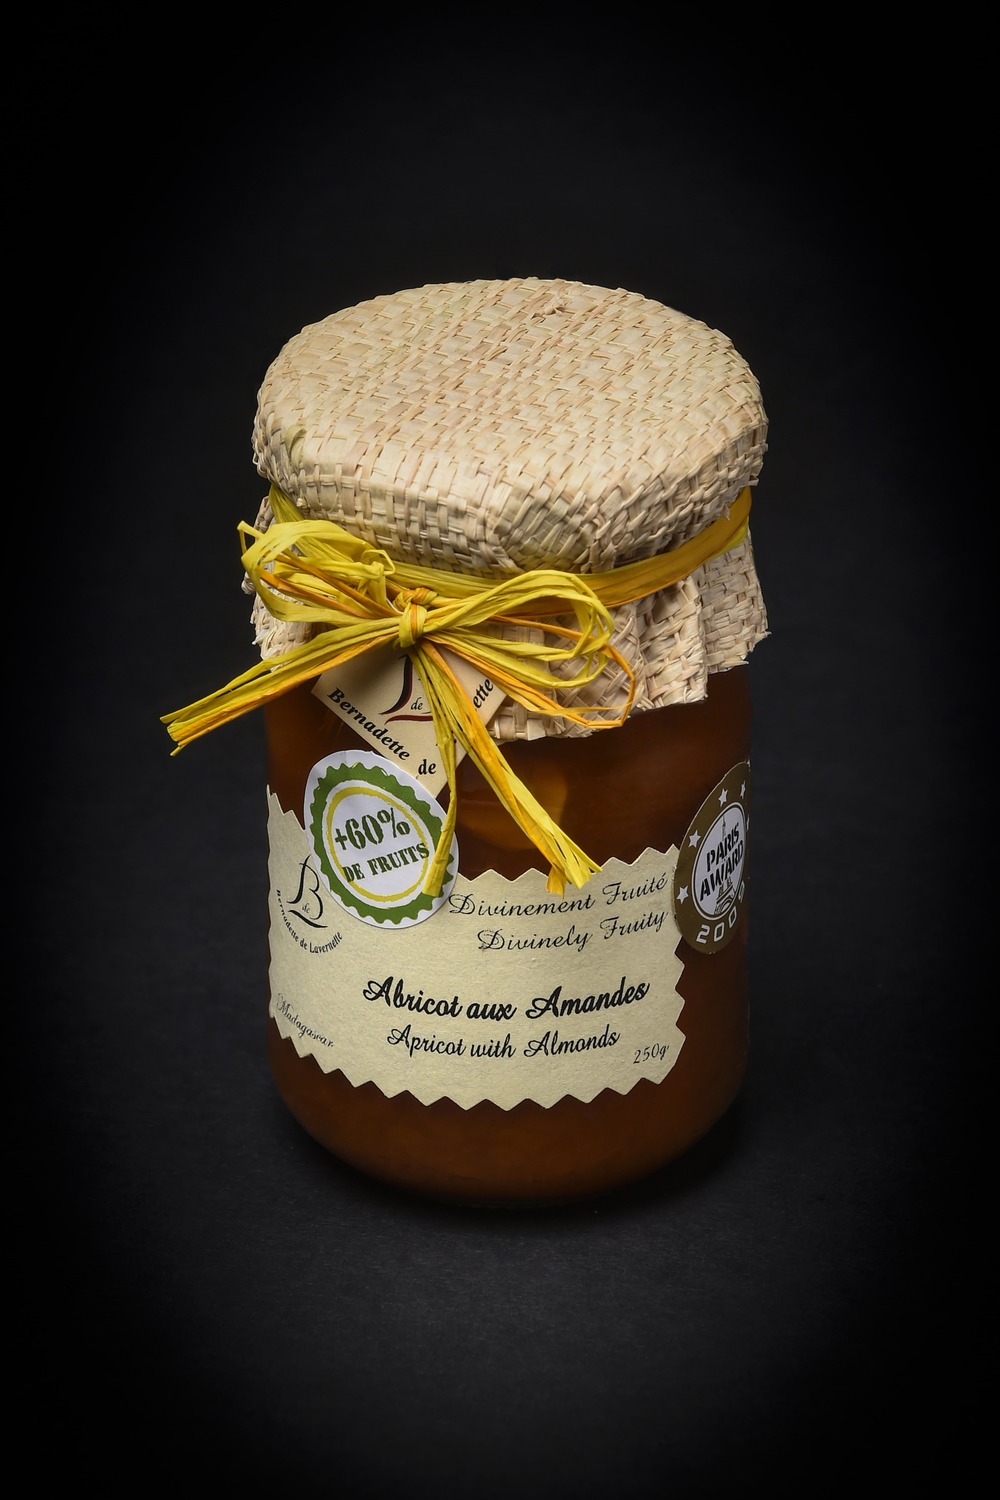 Apricot Jam with Almonds (250g)